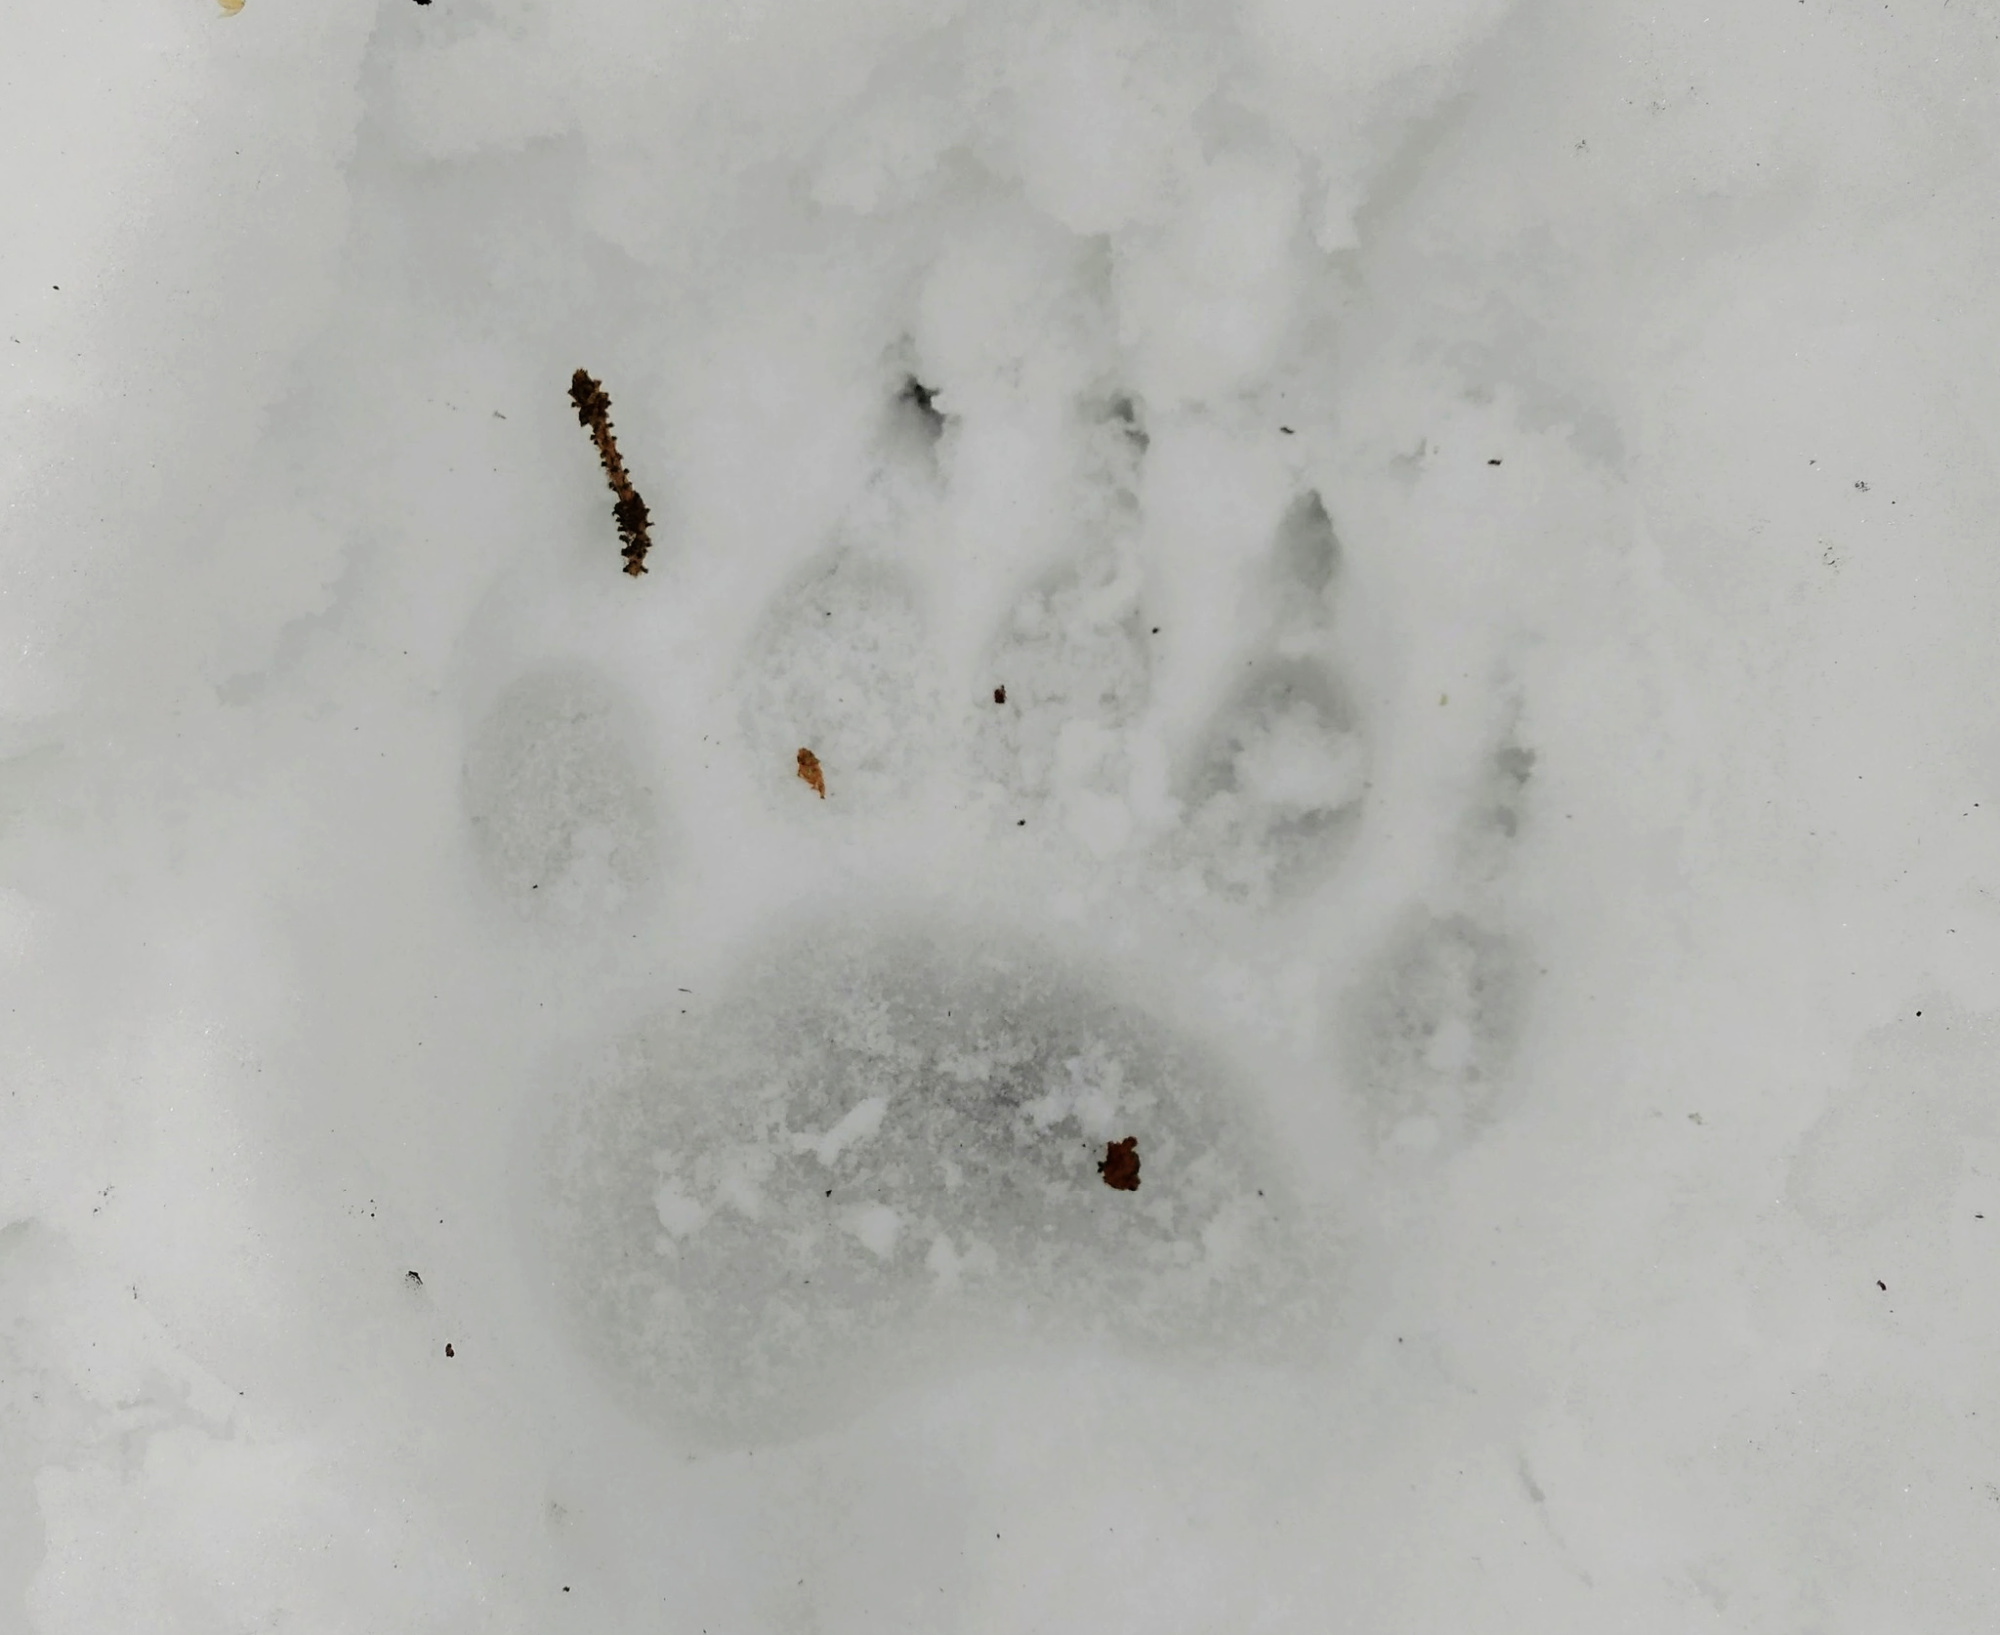 A black bear track shows up in snow.